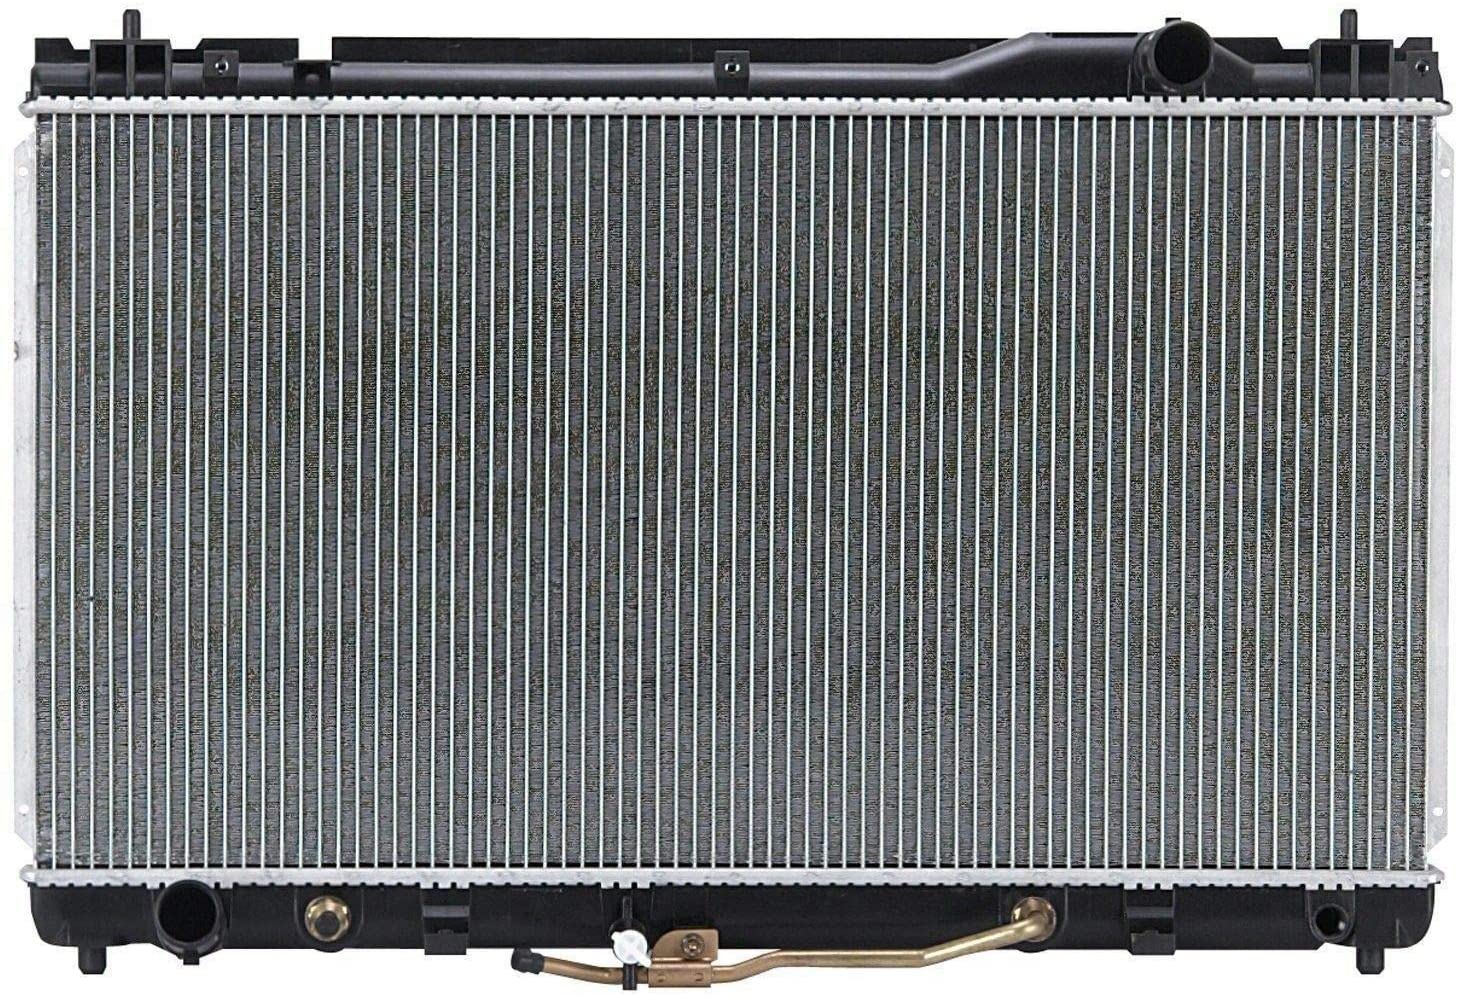 Klimoto Radiator | fits Toyota Camry 02-06 Lexus ES300 2002-2003 3.0L 3.3L V6 | Replaces TO3010260 164000A230 164000A240